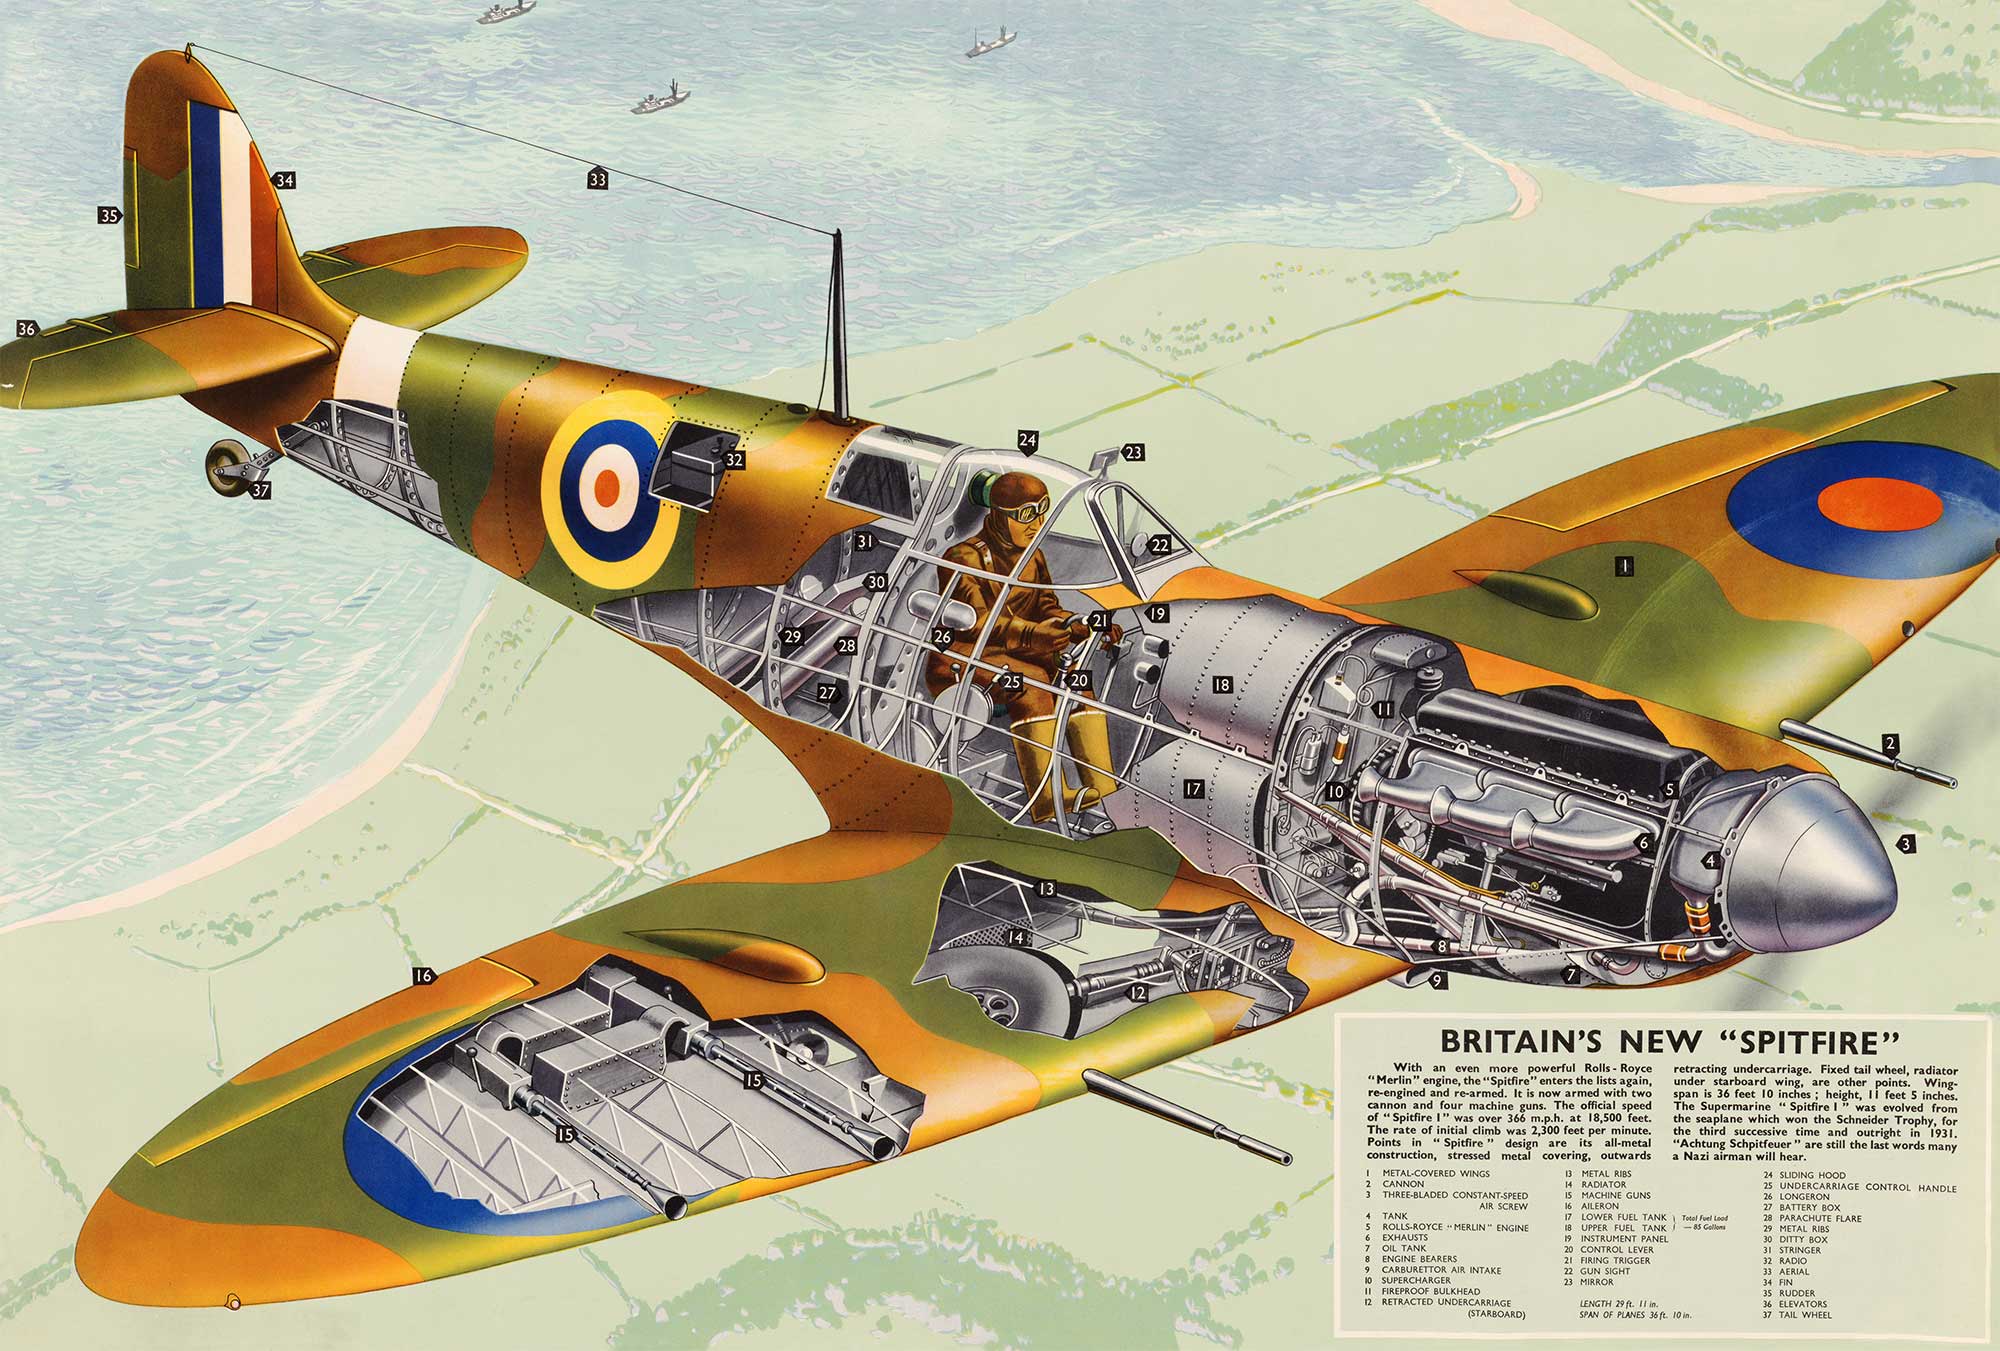 Puzzly Spitfire Wooden Puzzle